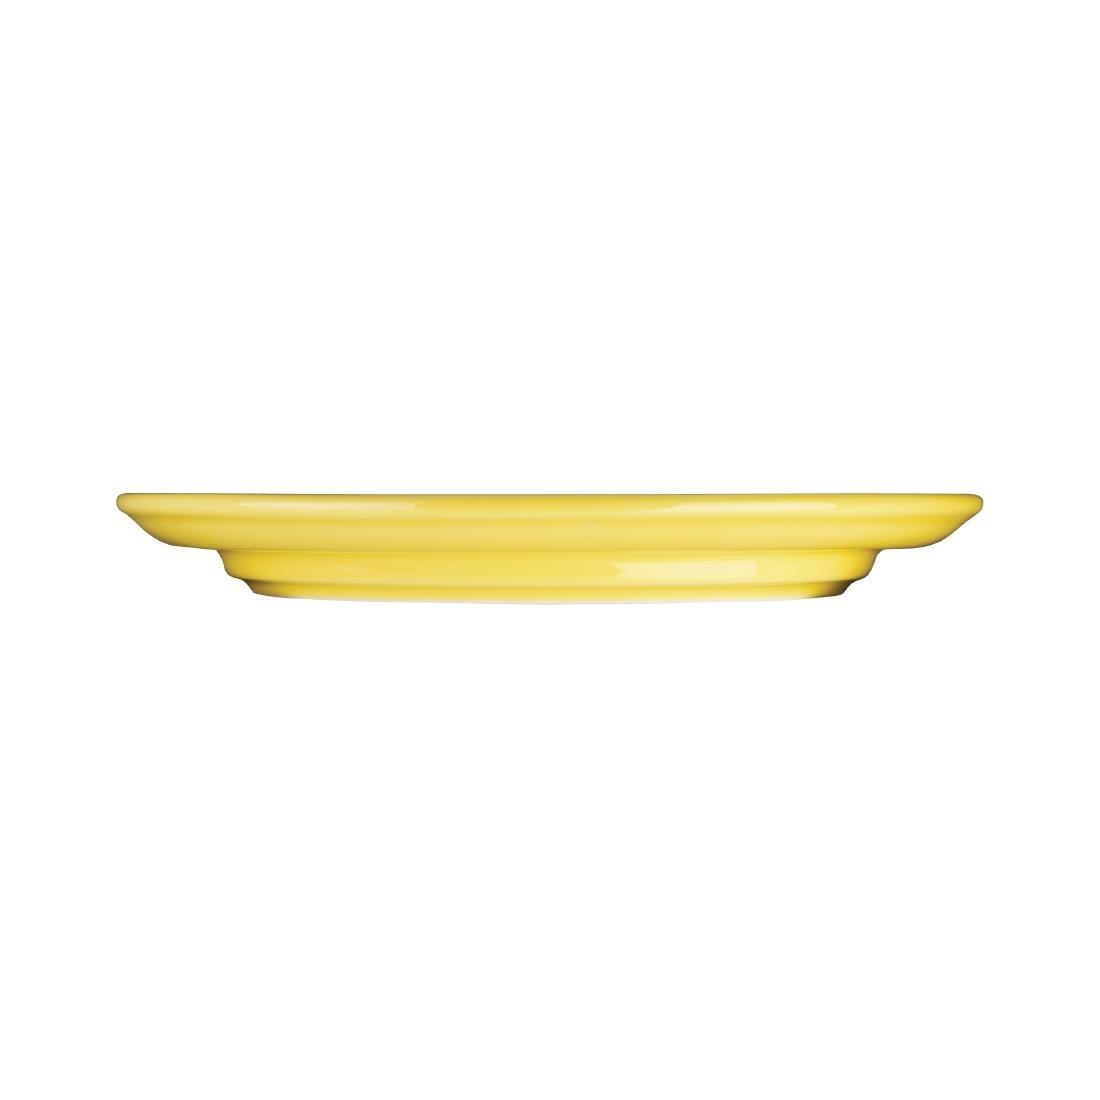 Olympia Heritage Raised Rim Plates Yellow 203mm (Pack of 4) - DW146  - 3